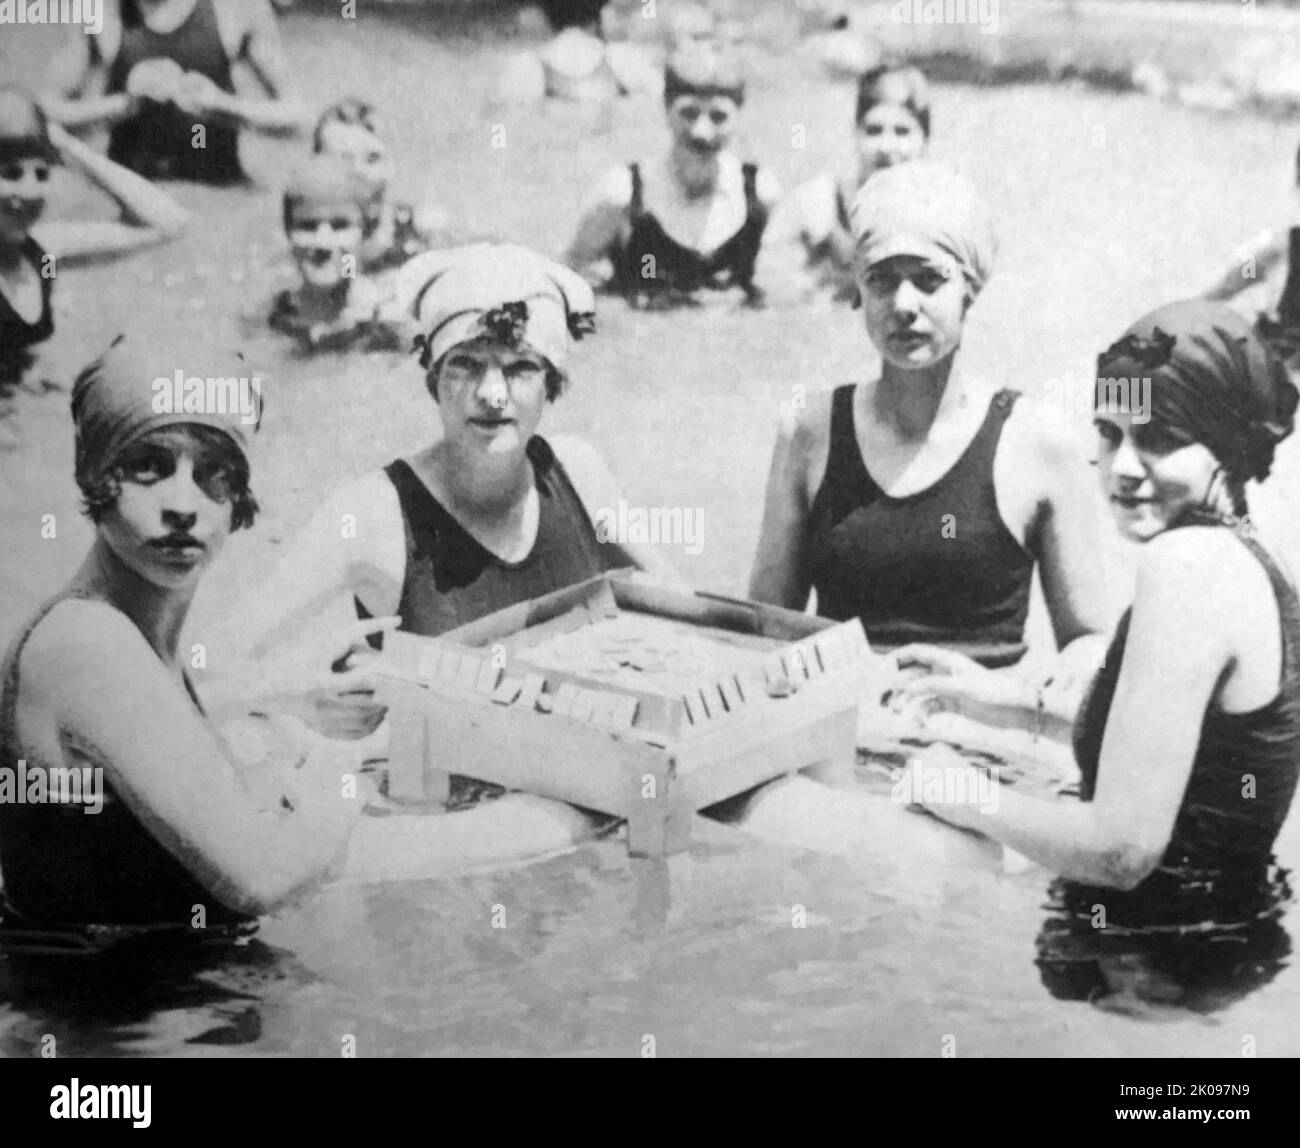 Women playing the imported Chinese game Mah Jongg, at Wardman Park Pool. Stock Photo